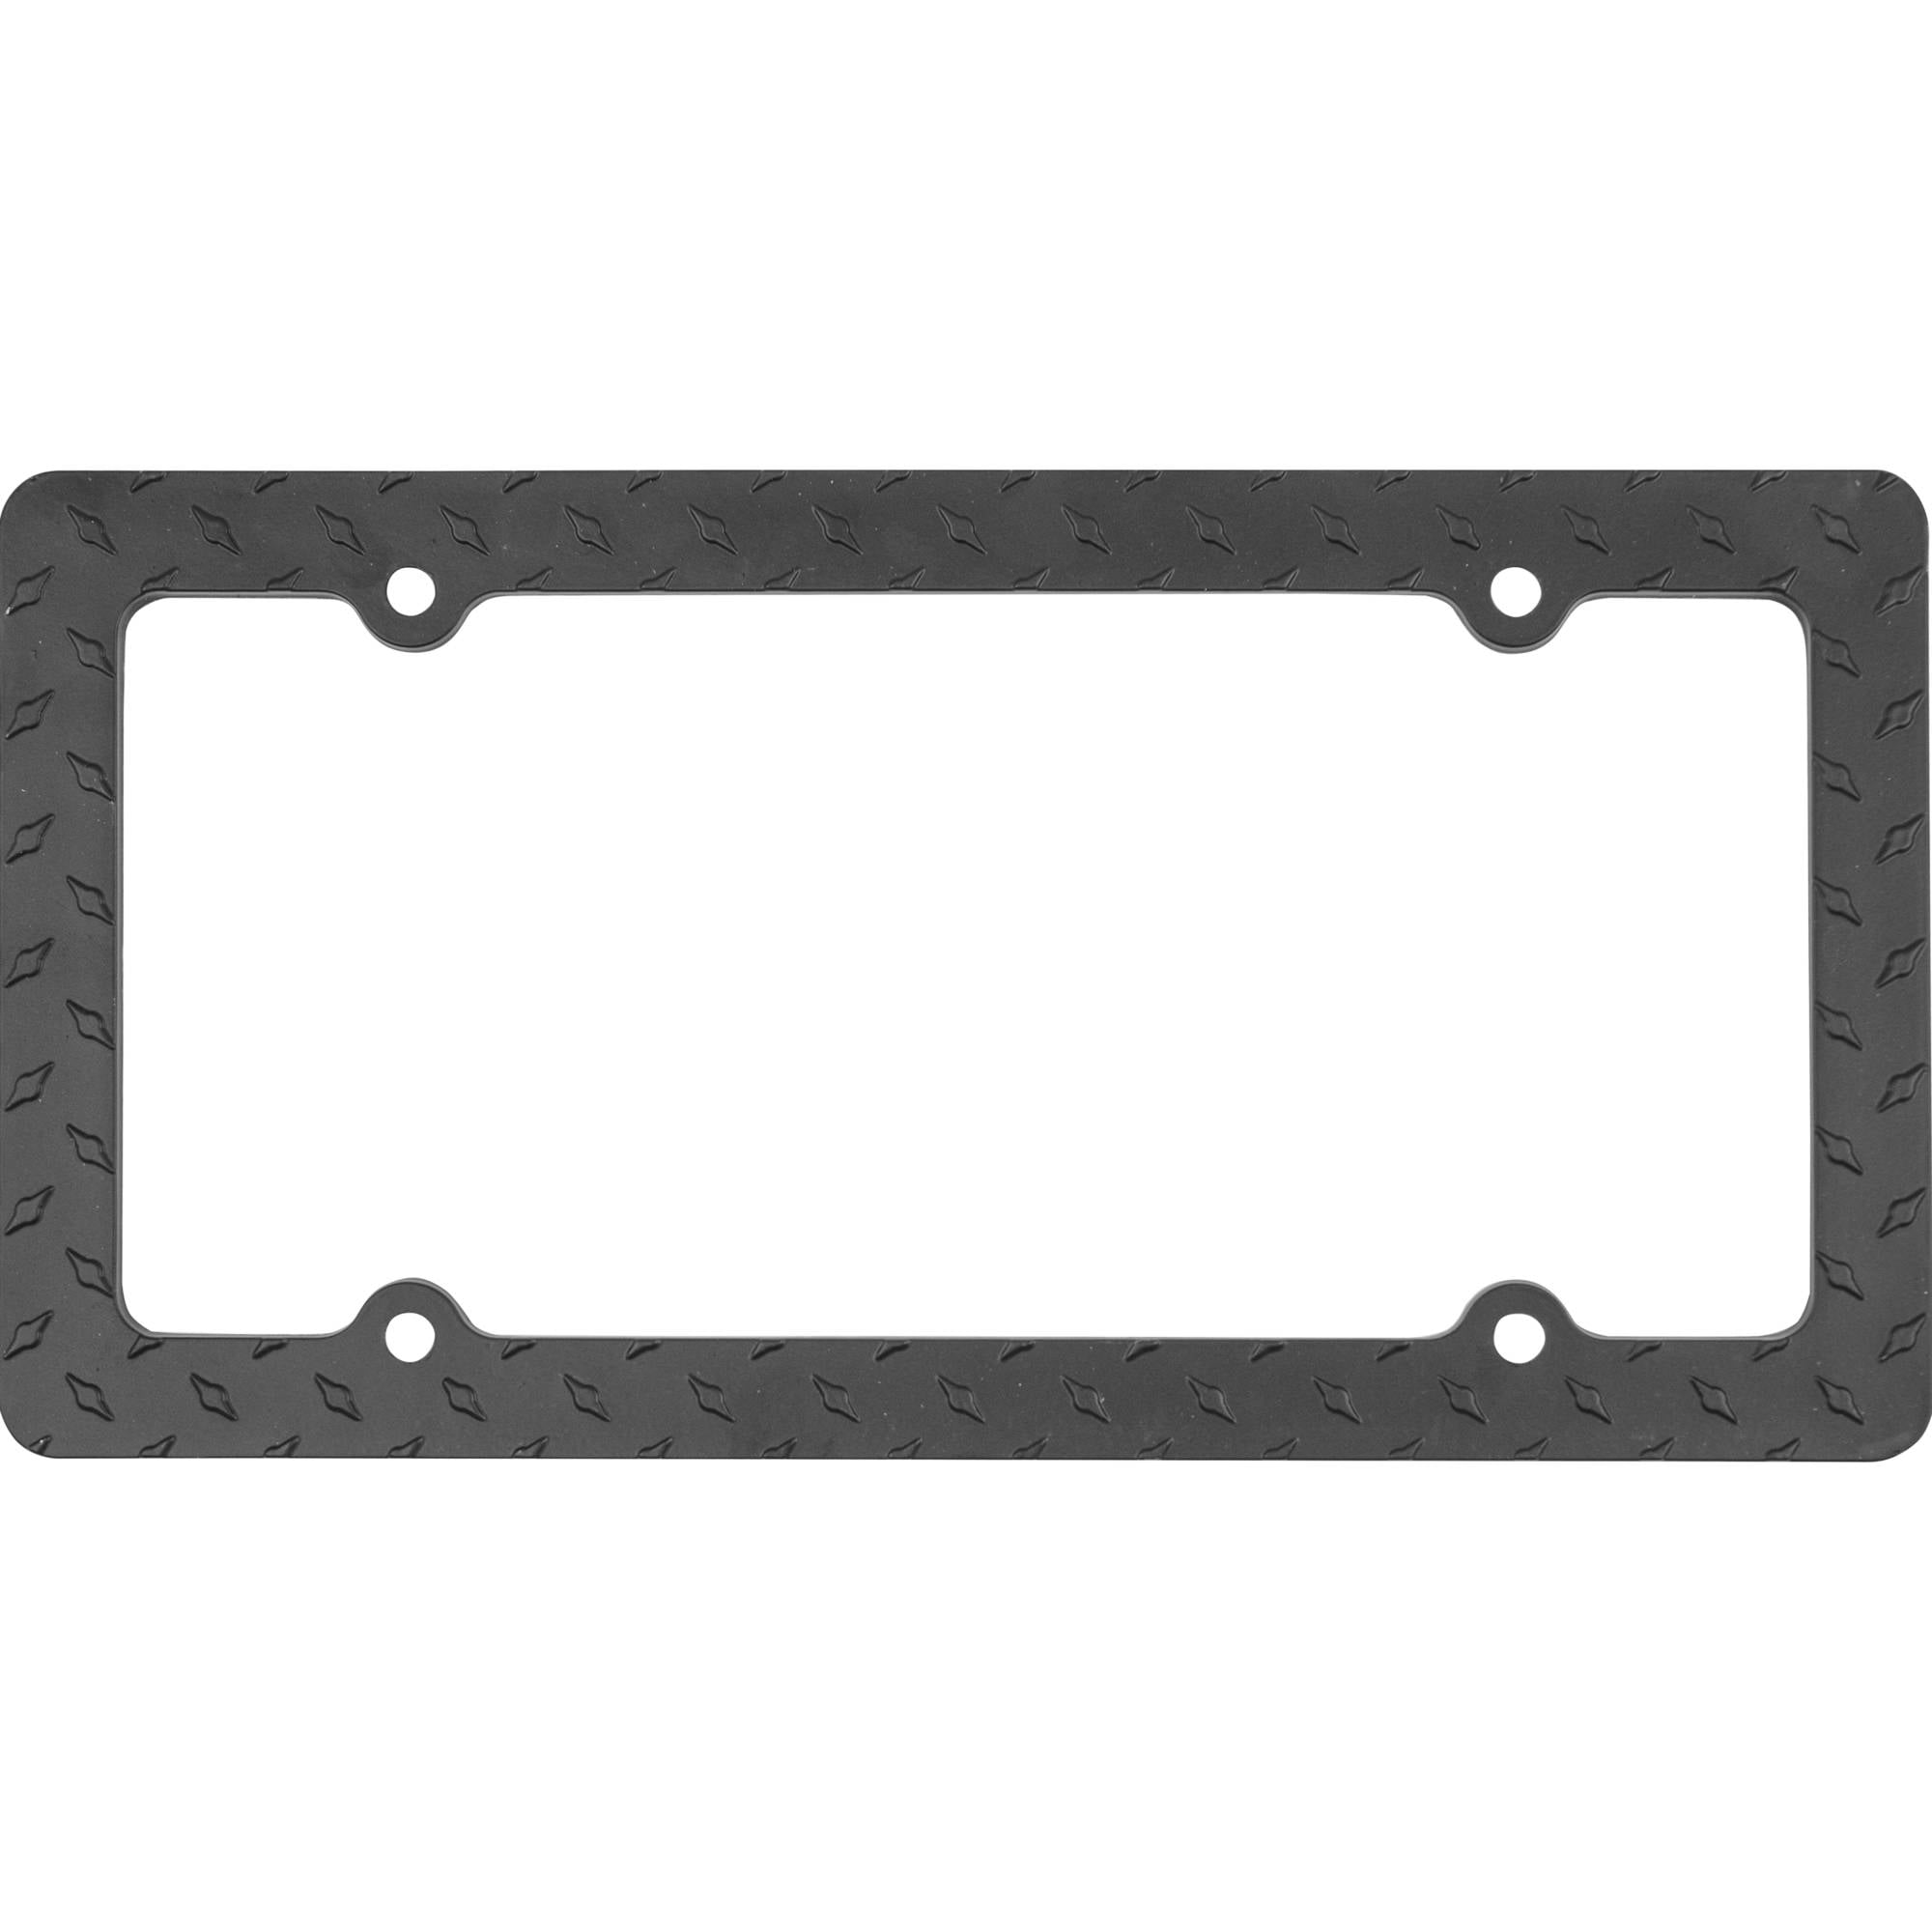 Black Steel Metal License Plate Frame Brake Check Just You A Heads Up 